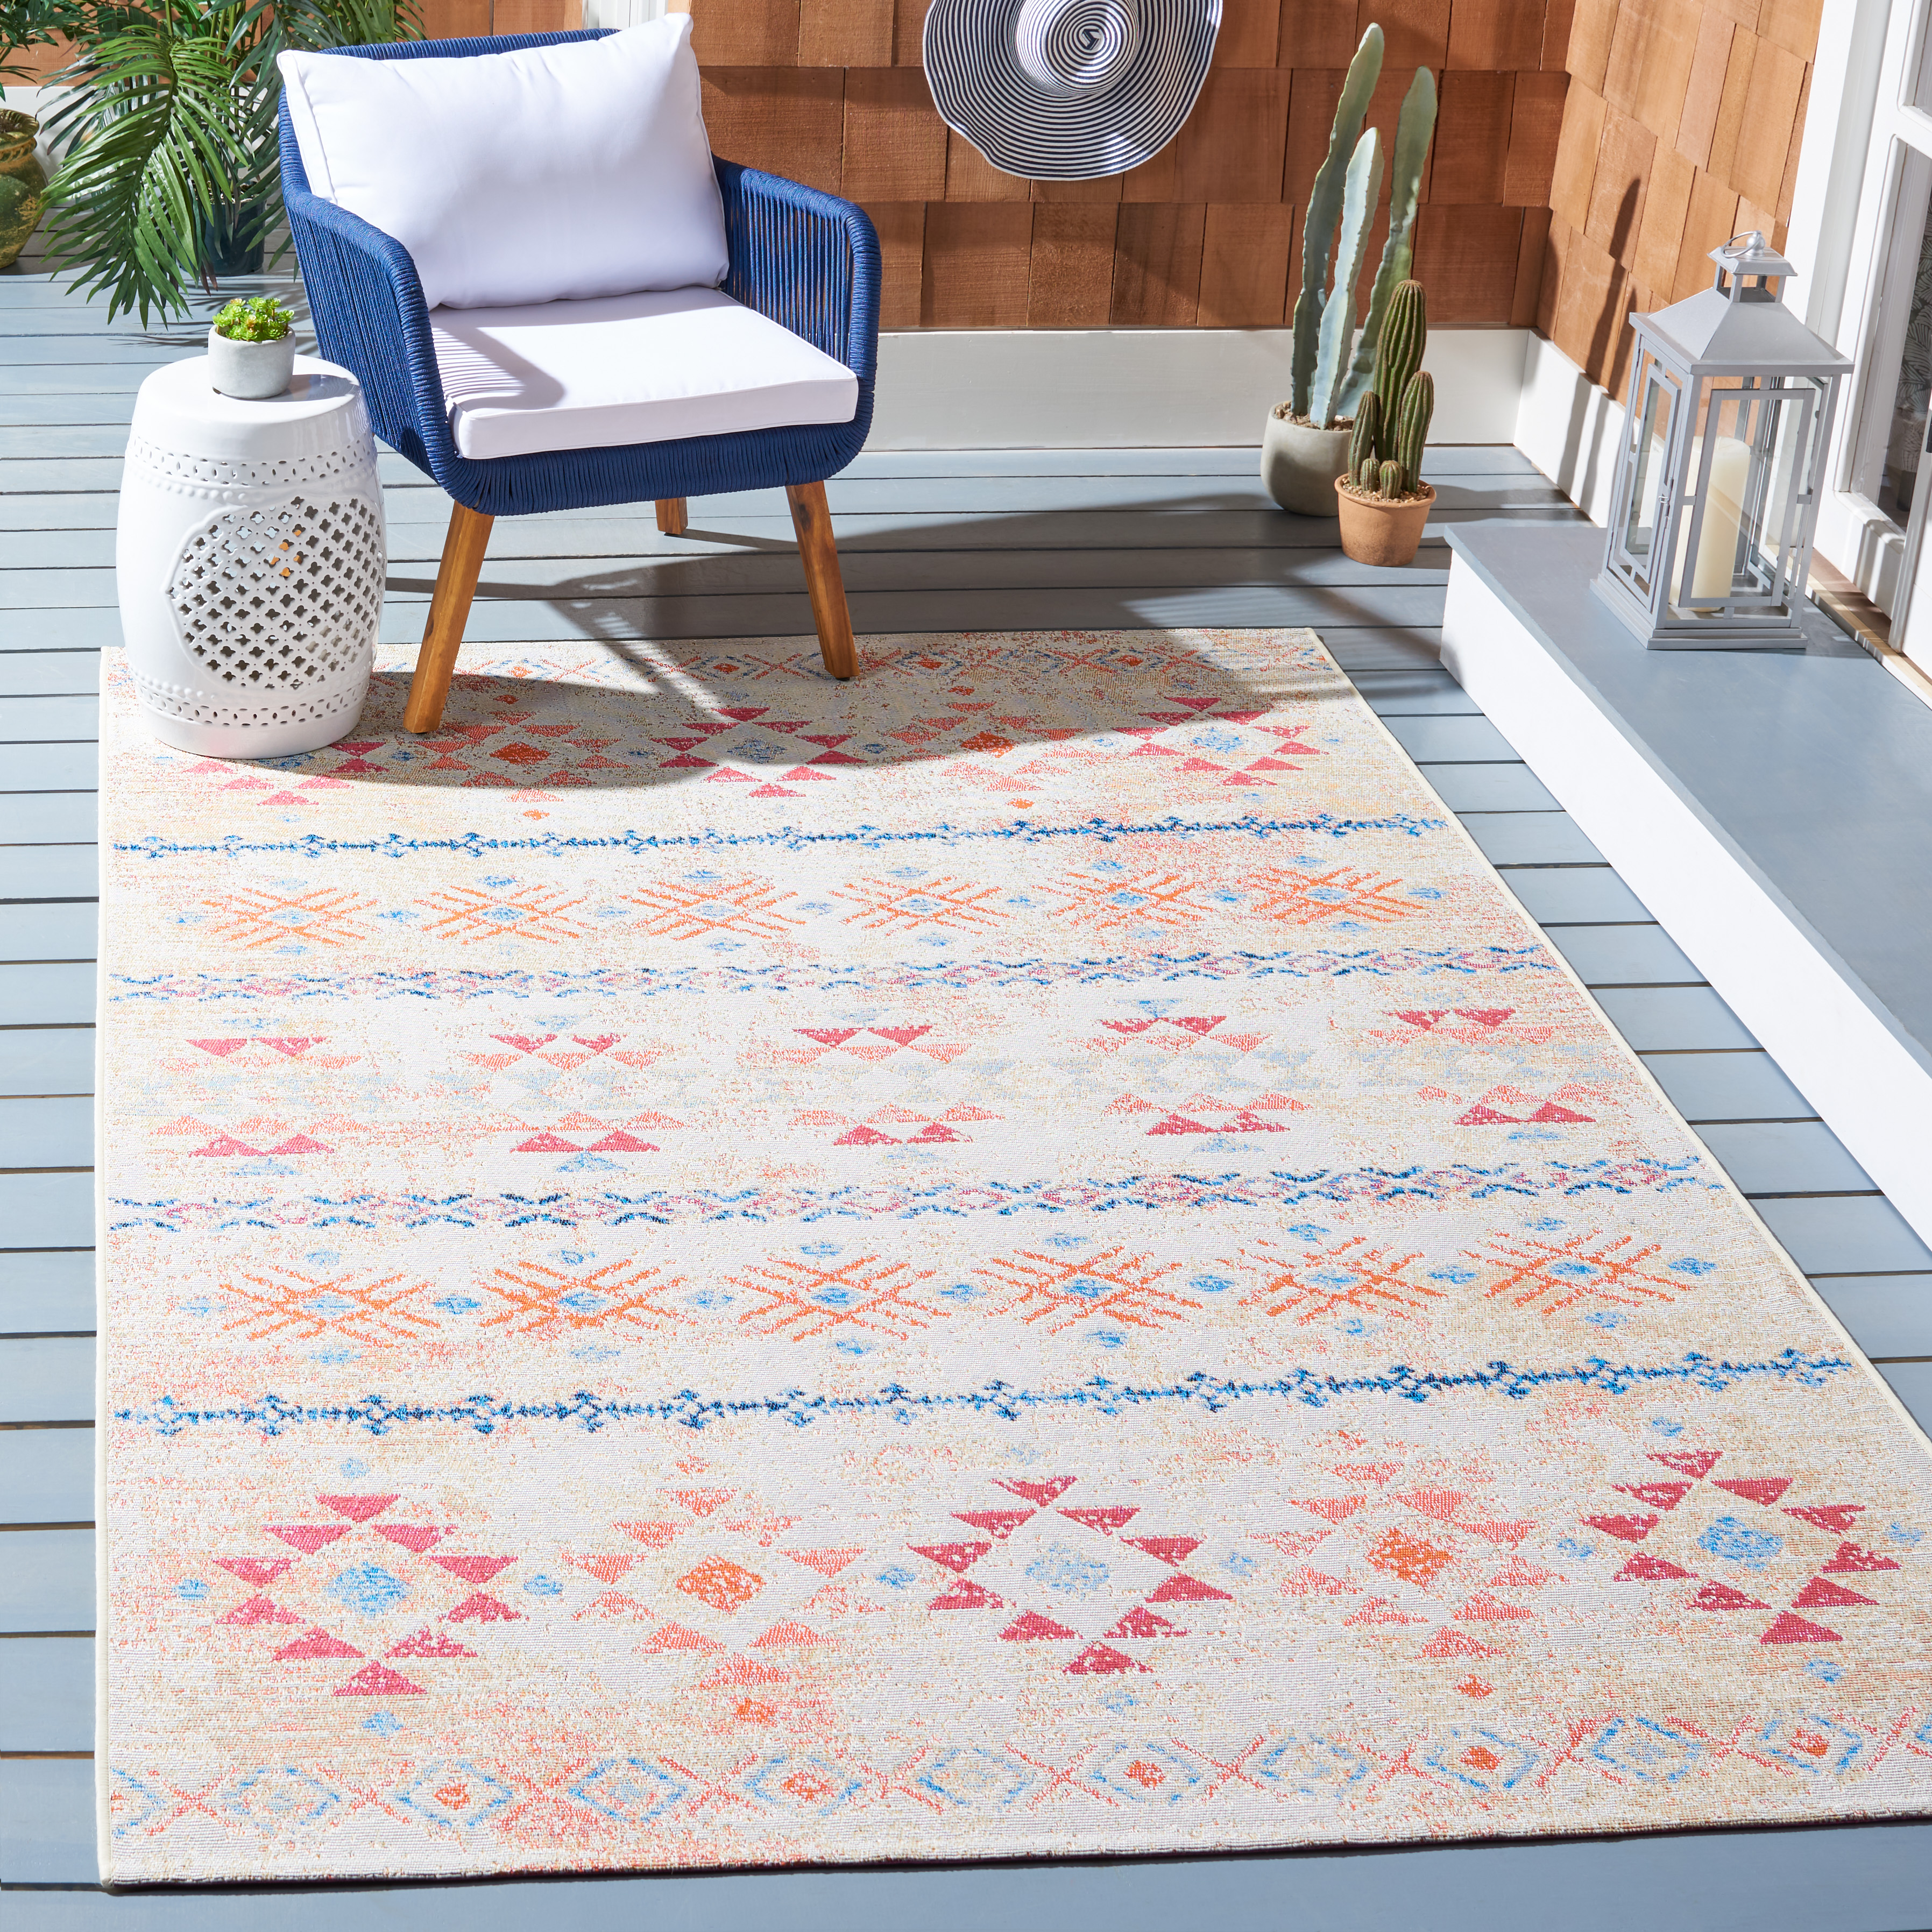 Safavieh Summer Donella Outdoor Boho Distressed Area Rug, Ivory/Red, 6'7" x 6'7" Square - image 1 of 6